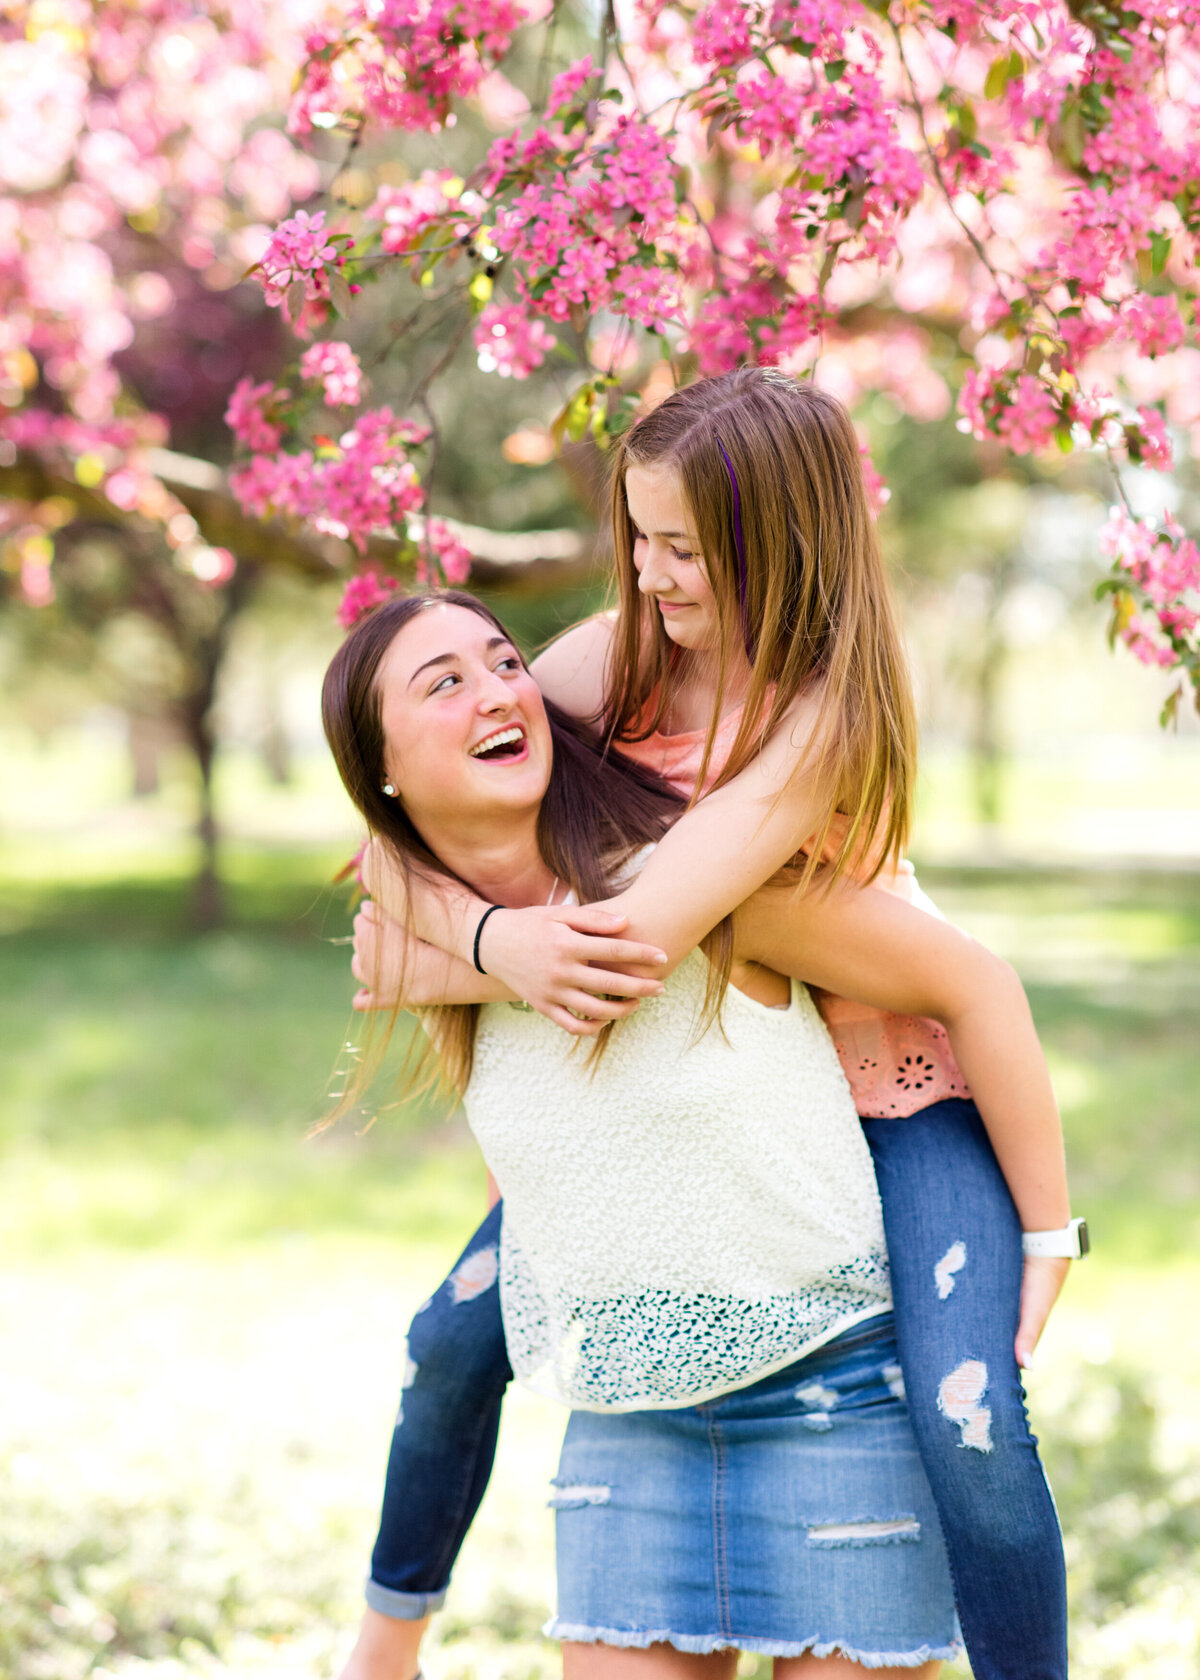 Des-Moines-Iowa-Family-Photographer-Theresa-Schumacher-Photography-Spring-Sisters-Laughing